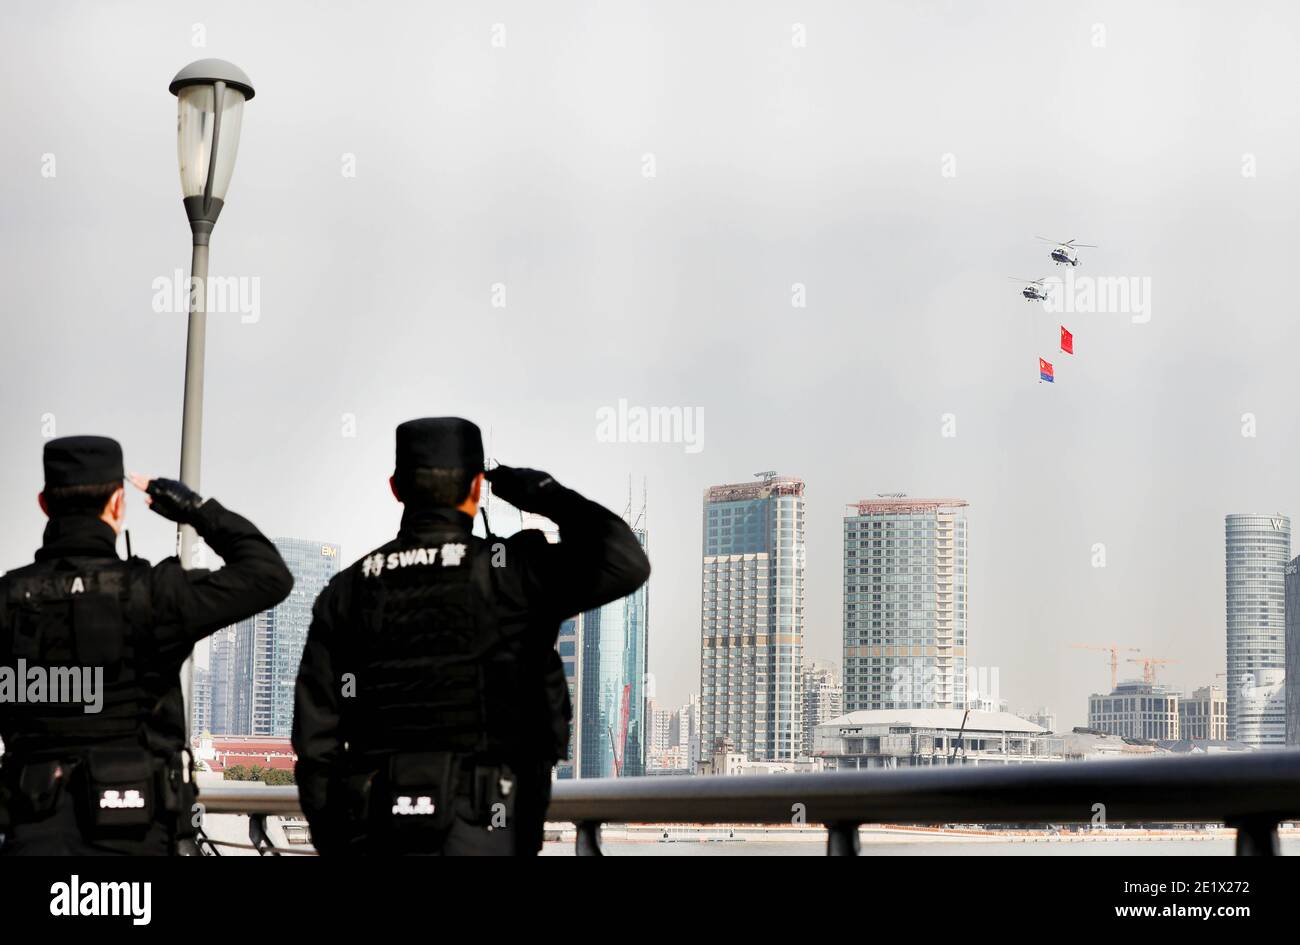 Shanghai. 10th Jan, 2021. Two police officers salute to the Chinese national flag and the police flag hanging on helicopters in east China's Shanghai, Jan. 10, 2021. Activities were held to mark the first Chinese People's Police Day, which falls on Sunday. Credit: Fang Zhe/Xinhua/Alamy Live News Stock Photo